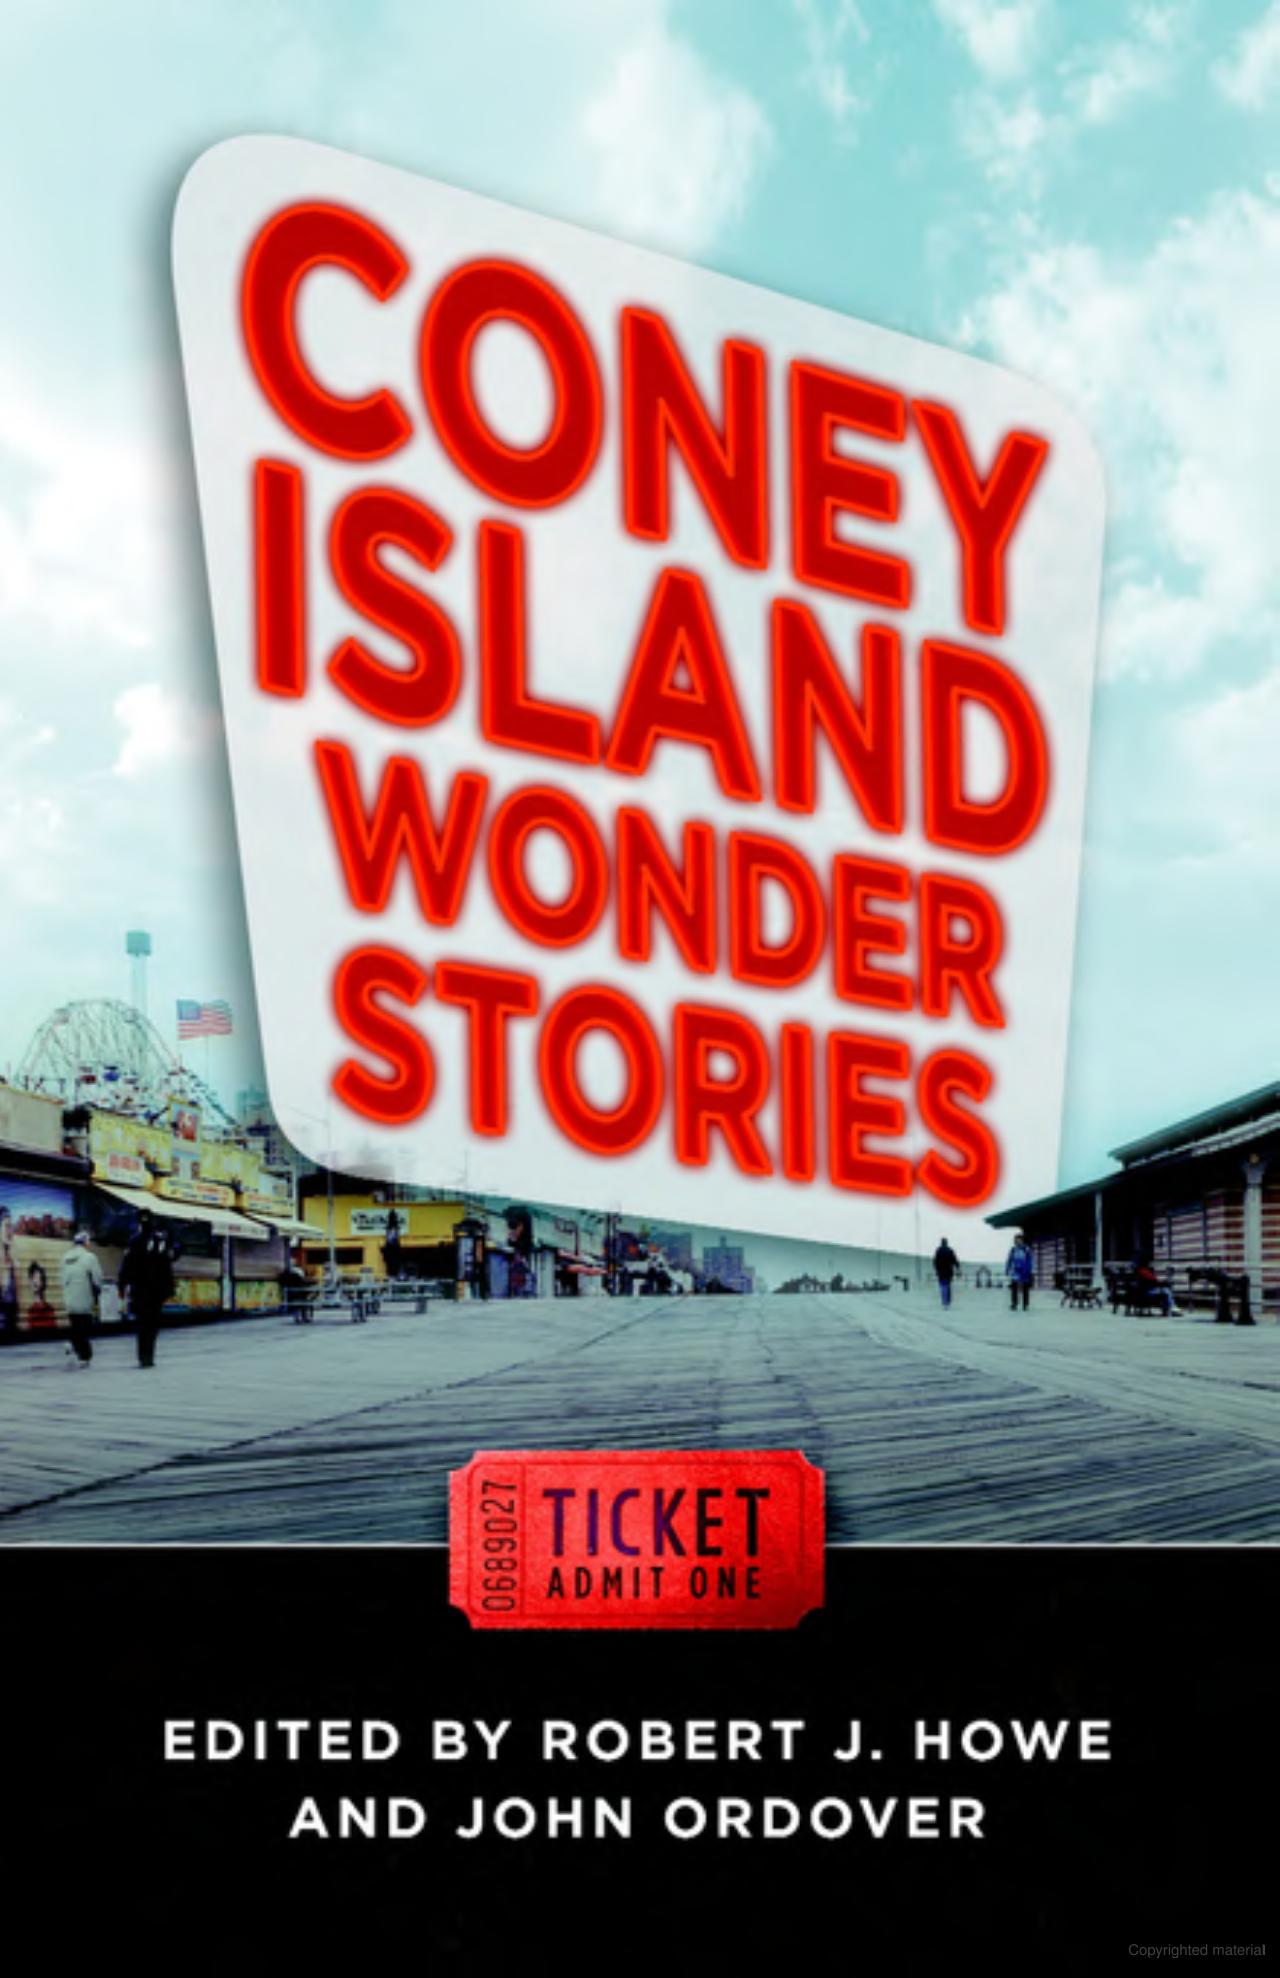 Cover Image and Introduction to the speculative fiction anthology Coney Island Wonder Stories.